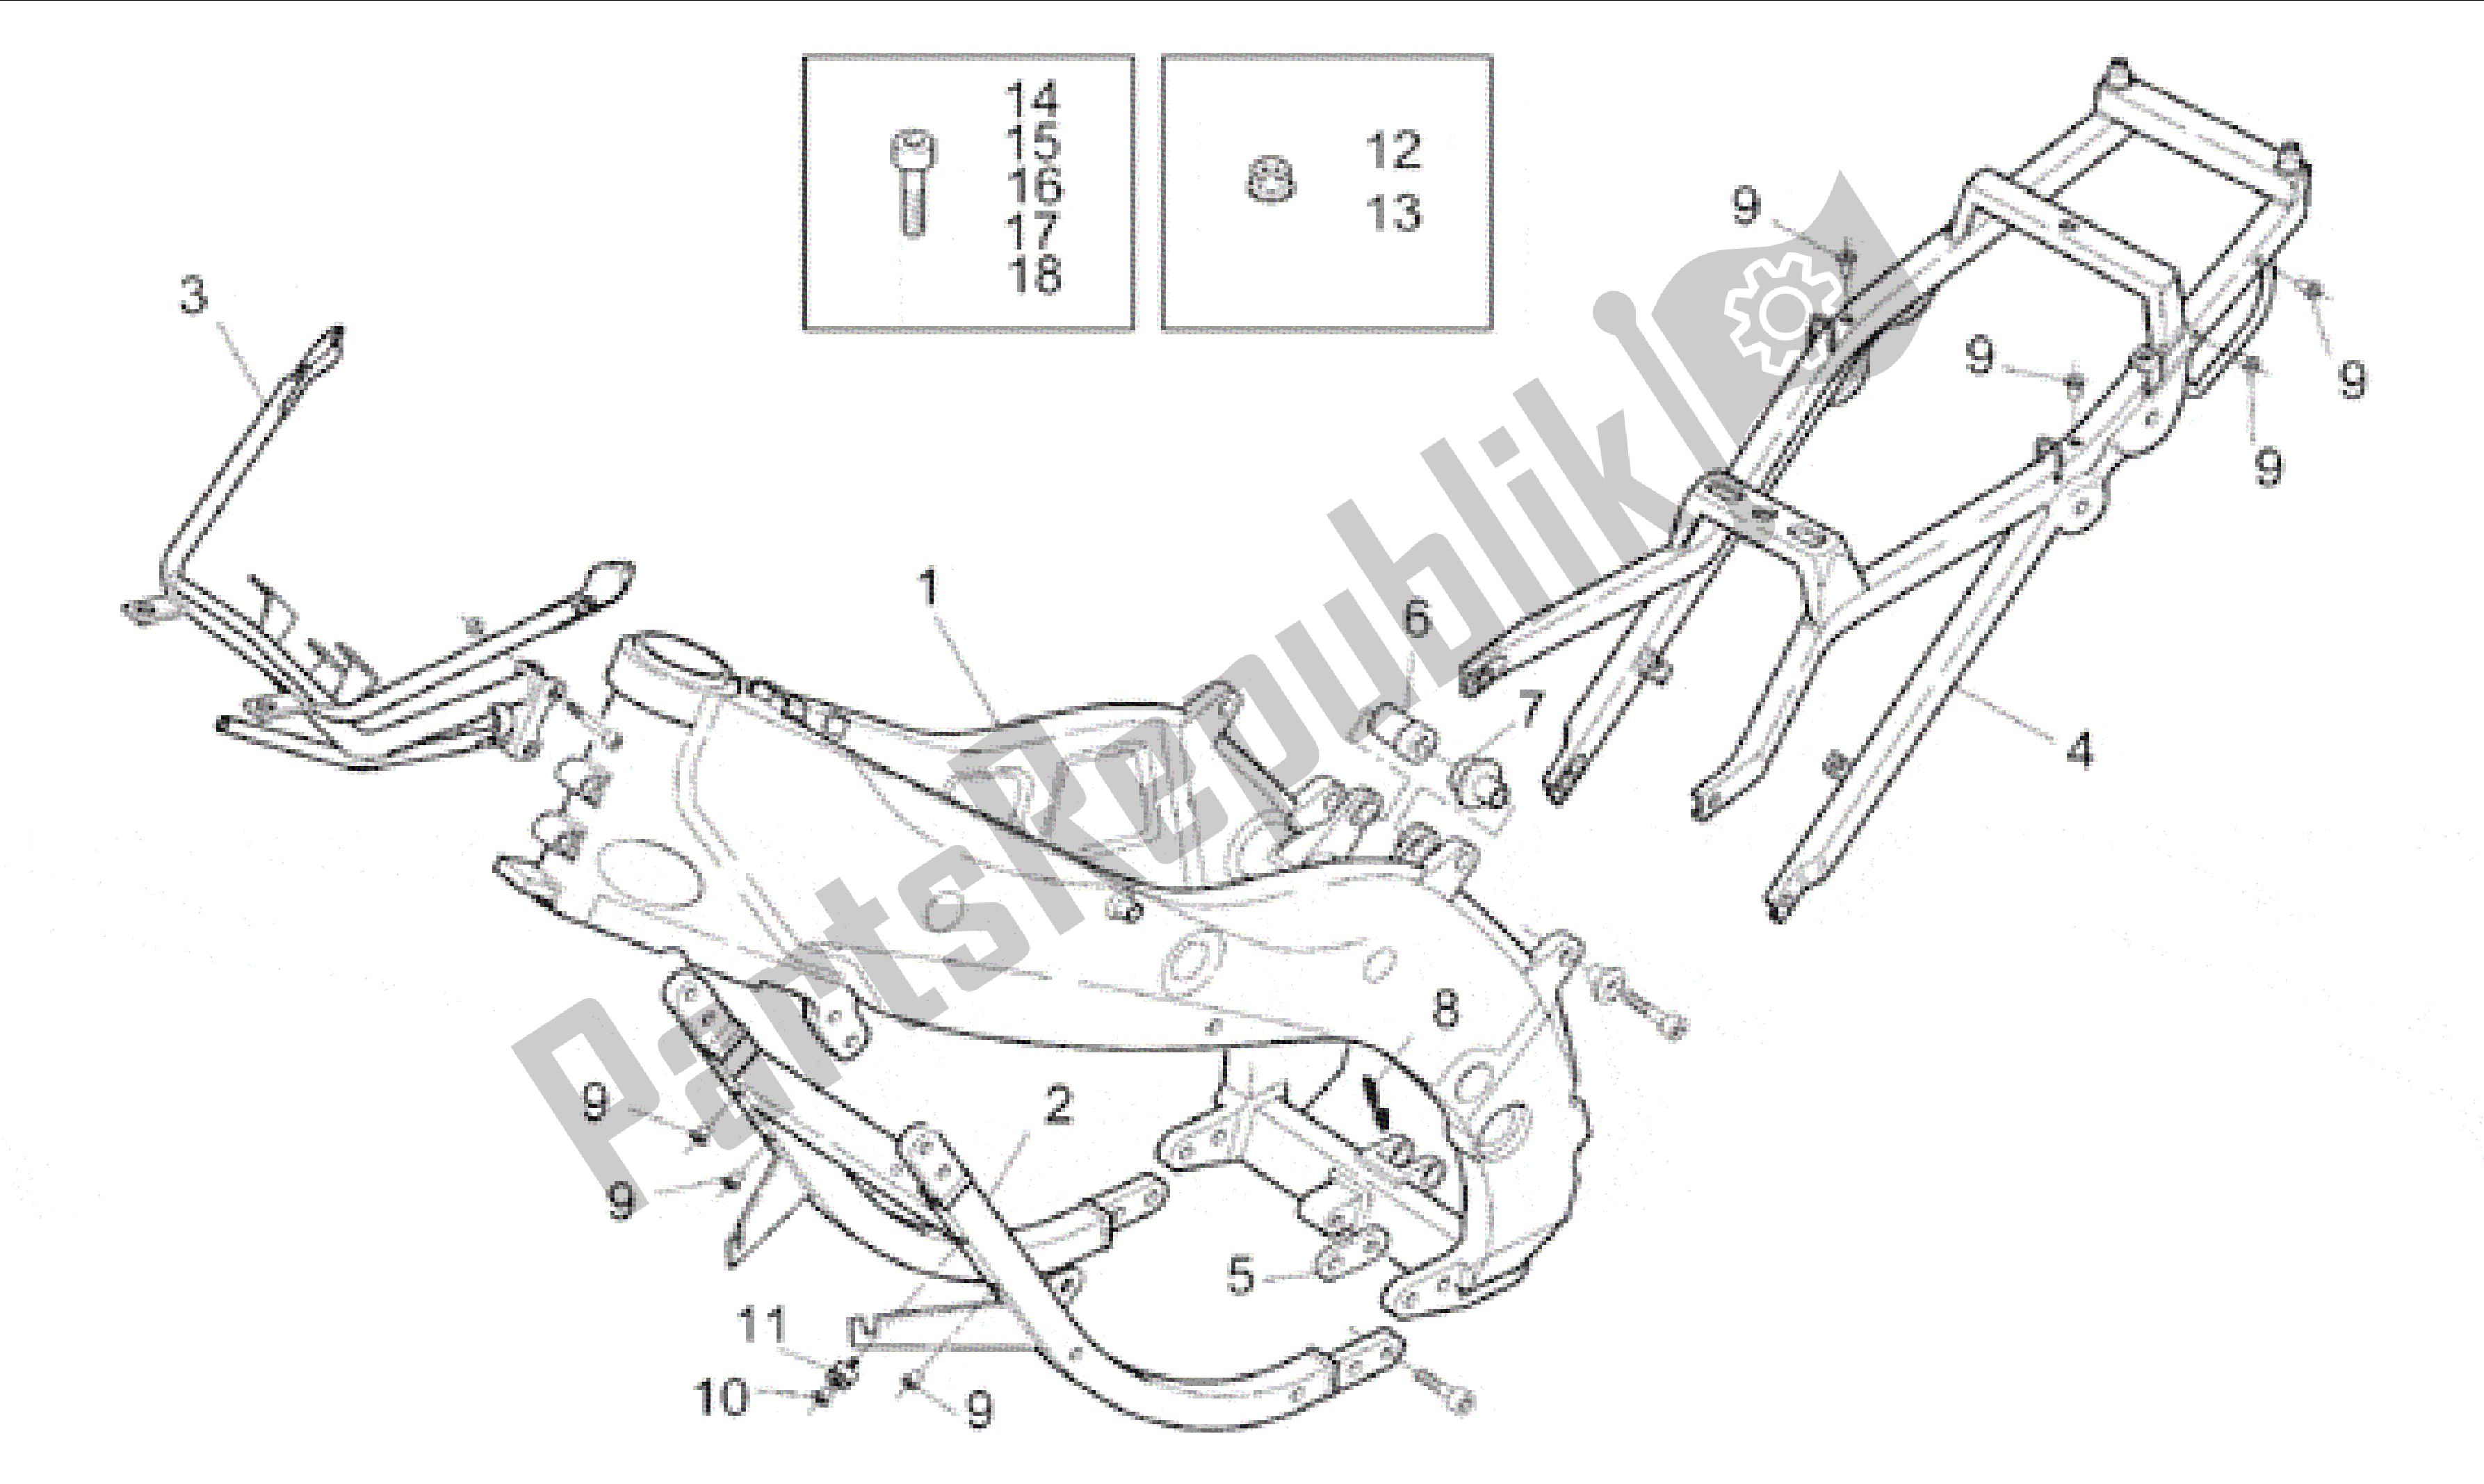 All parts for the Frame of the Aprilia RS 250 1995 - 1997